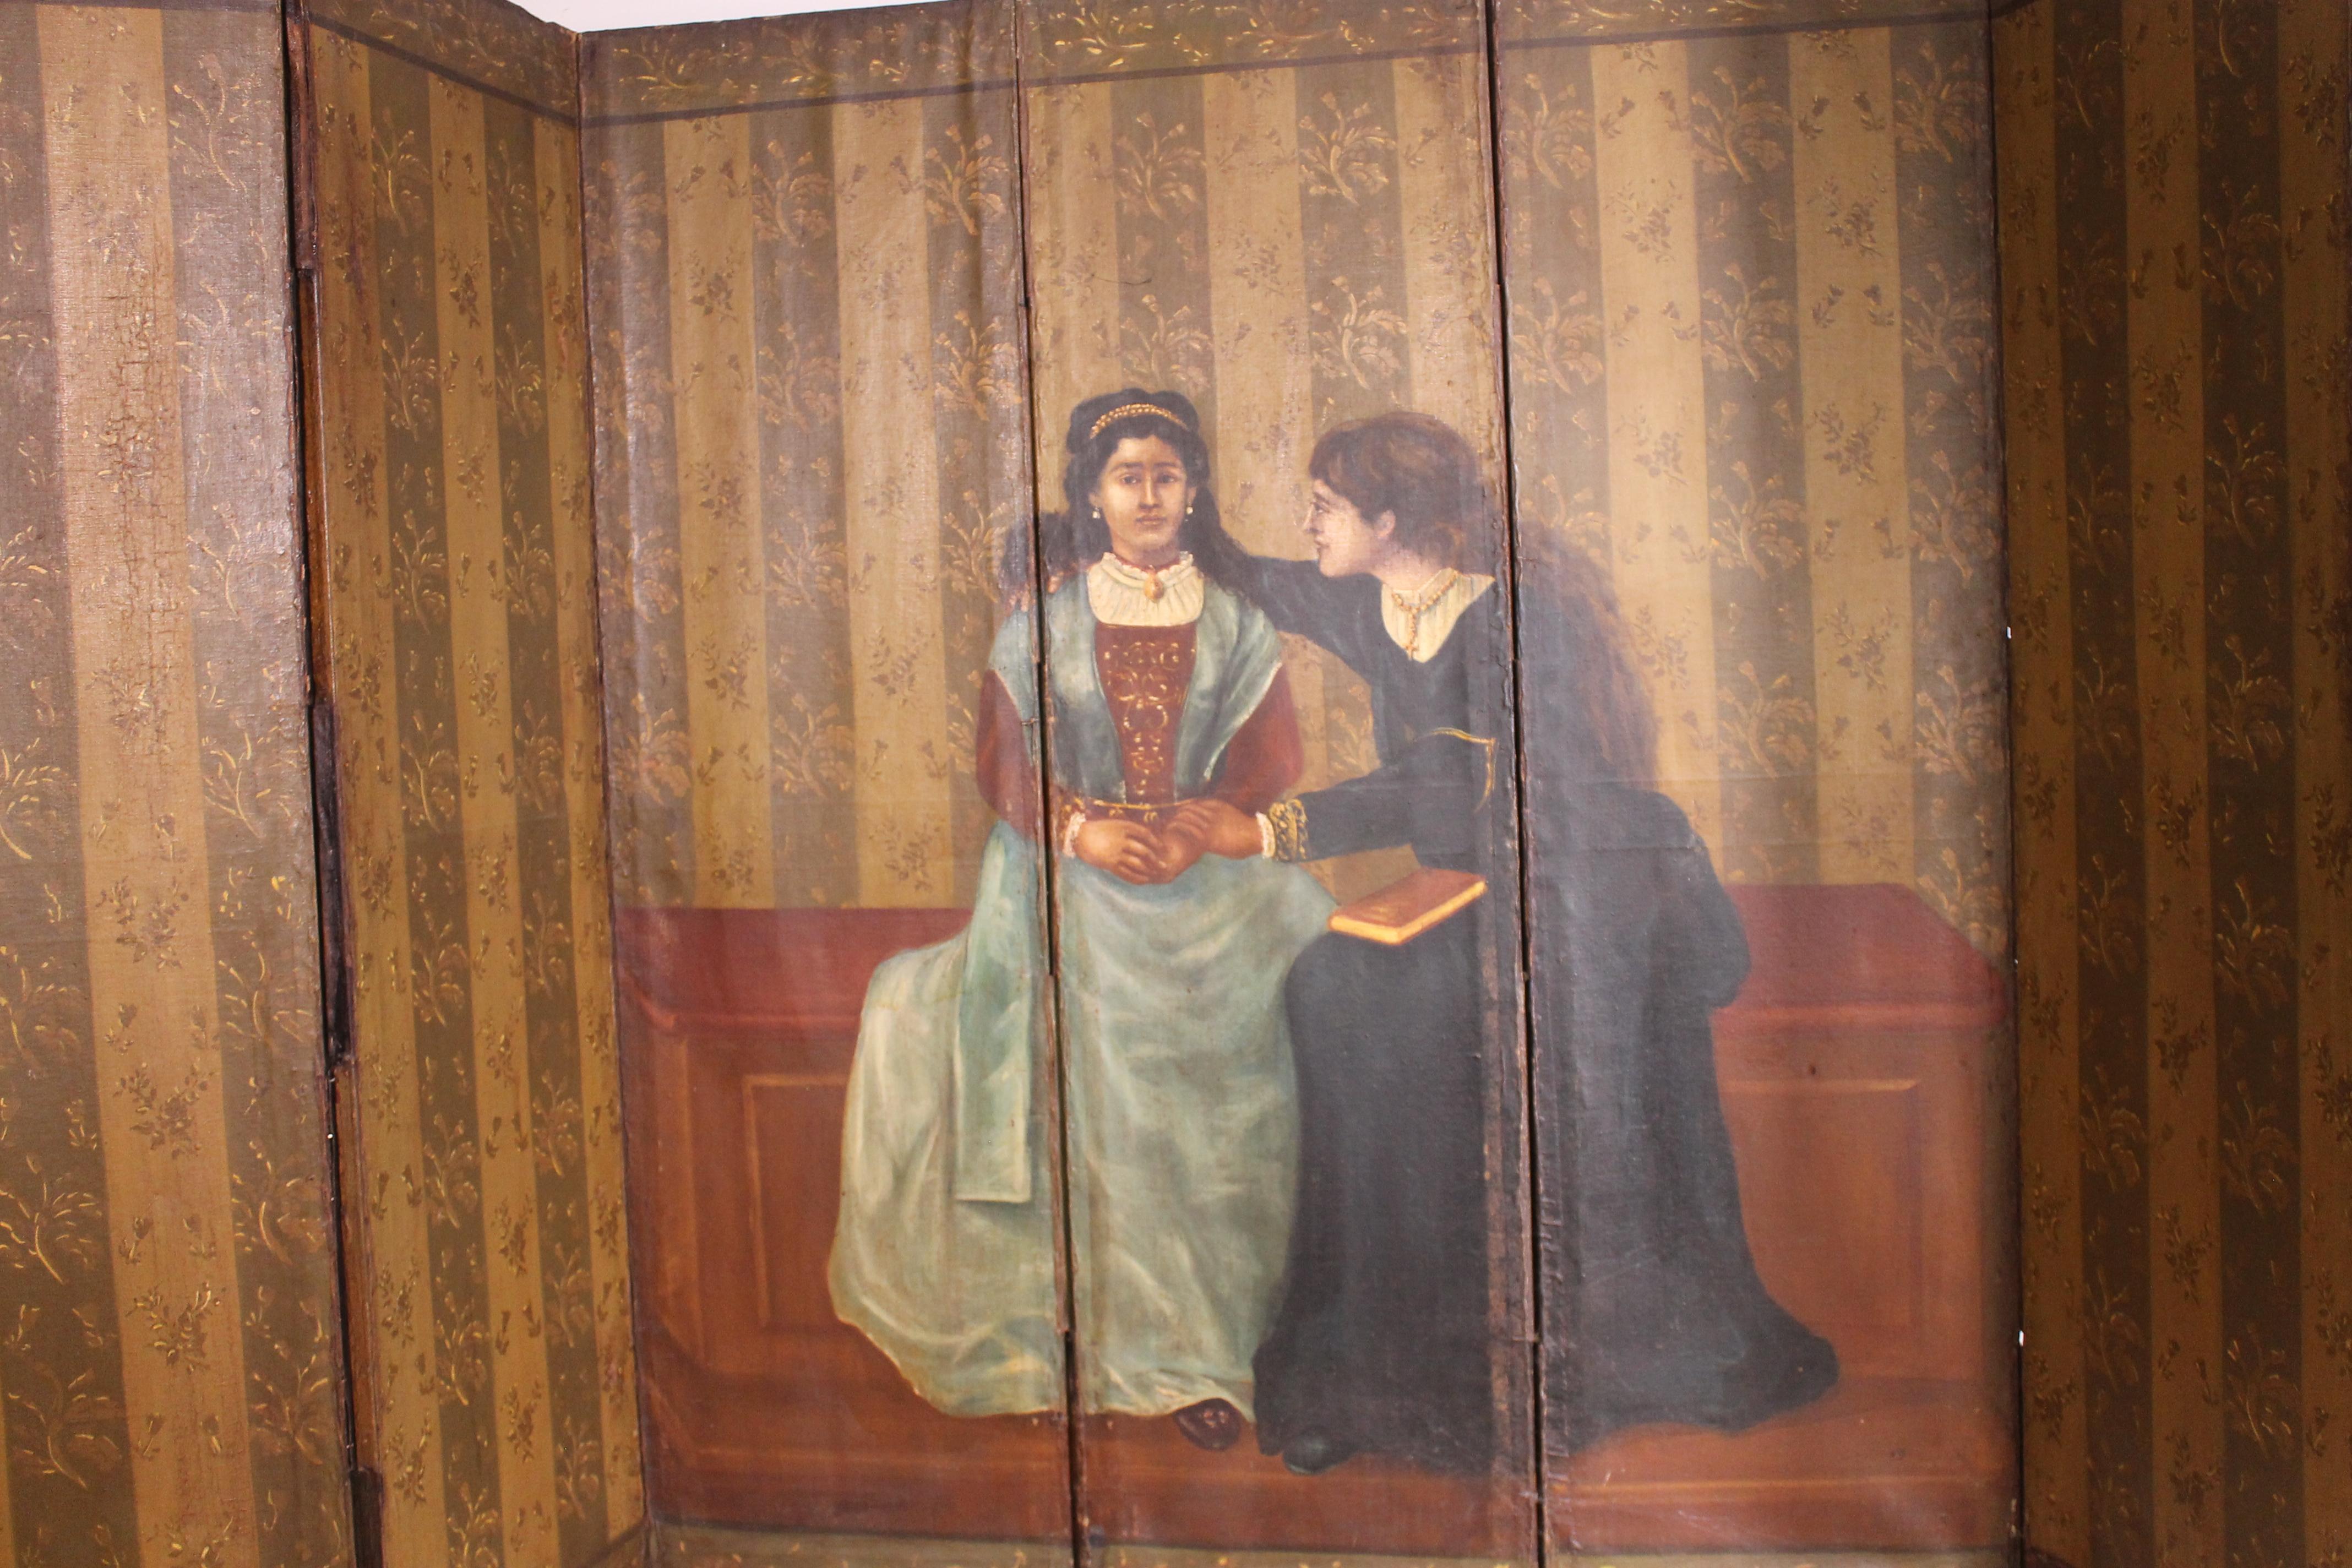 Double Side Folding Screen 18th Century Painting, 7 Fold 2